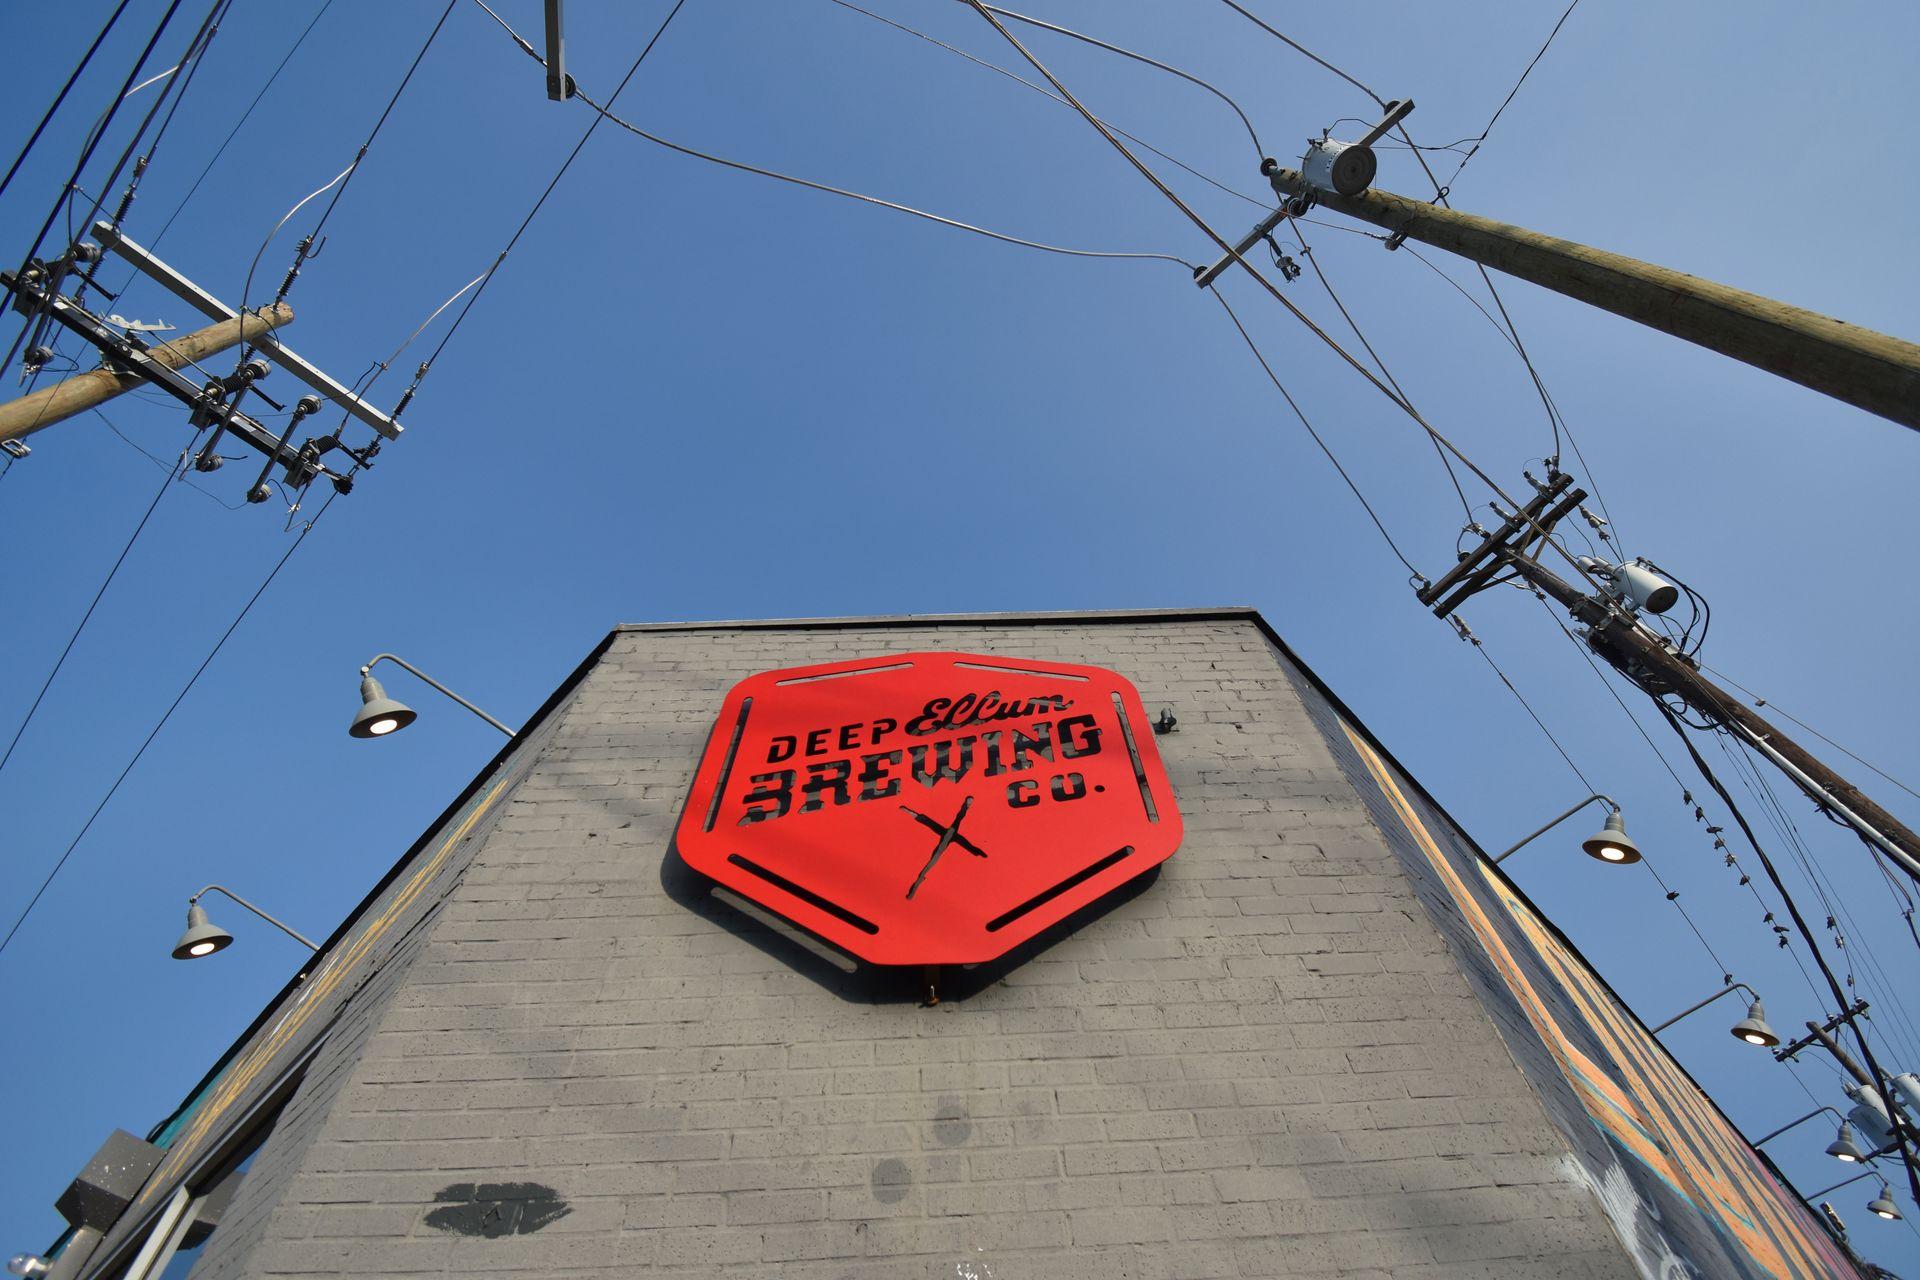 Looking up at a red sign that reads "Deep Ellum Brewing Co" on a gray building